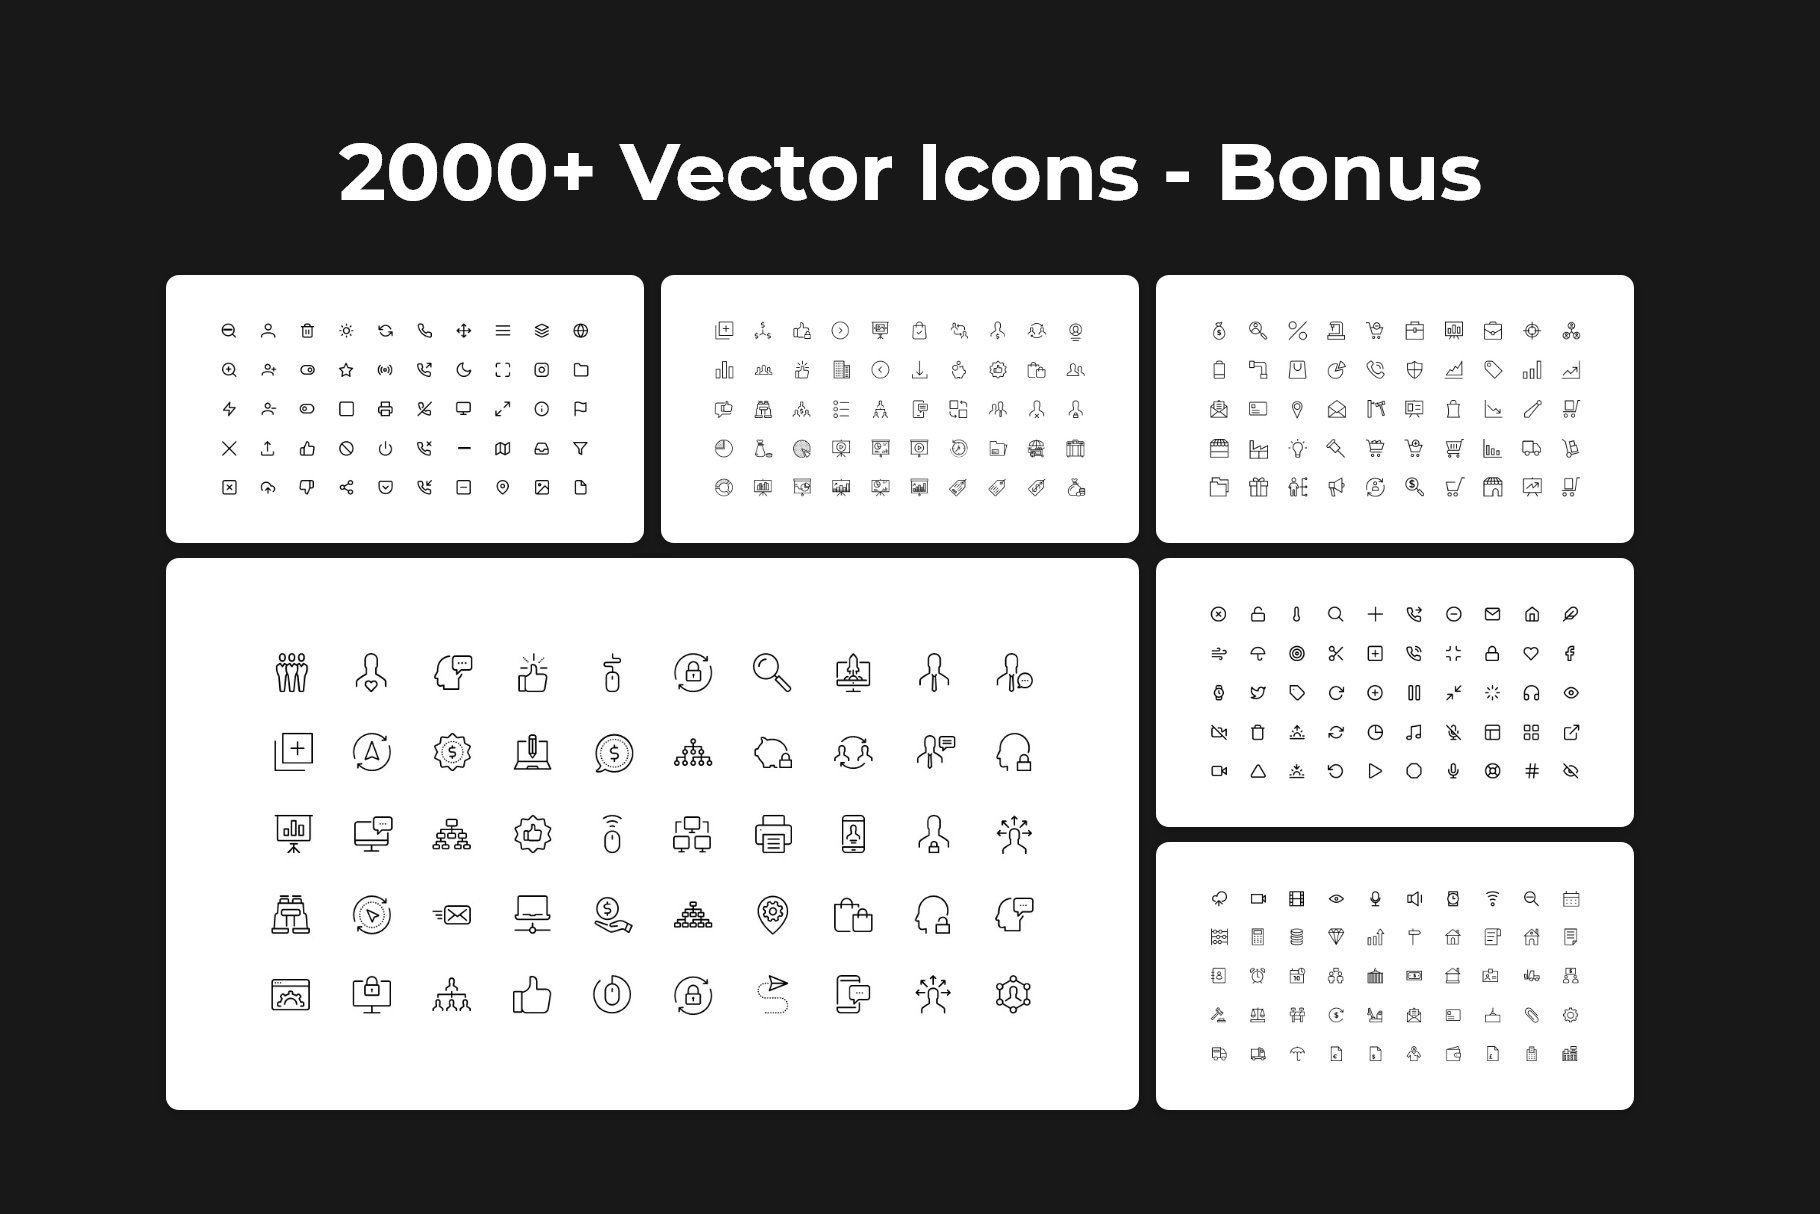 A lot of vector icons.